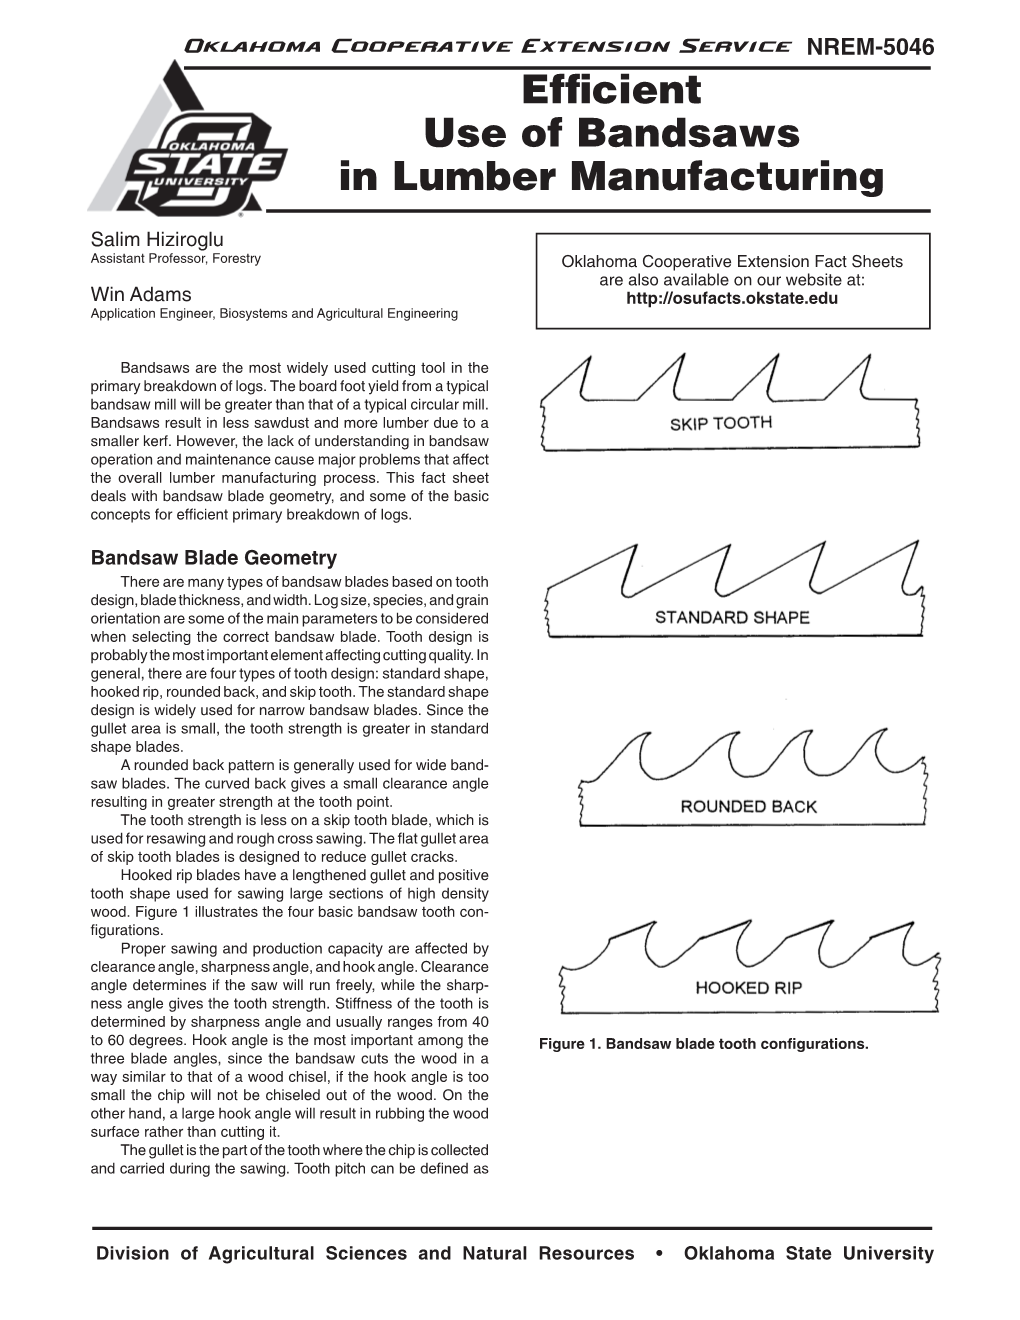 Efficient Use of Bandsaws in Lumber Manufacturing